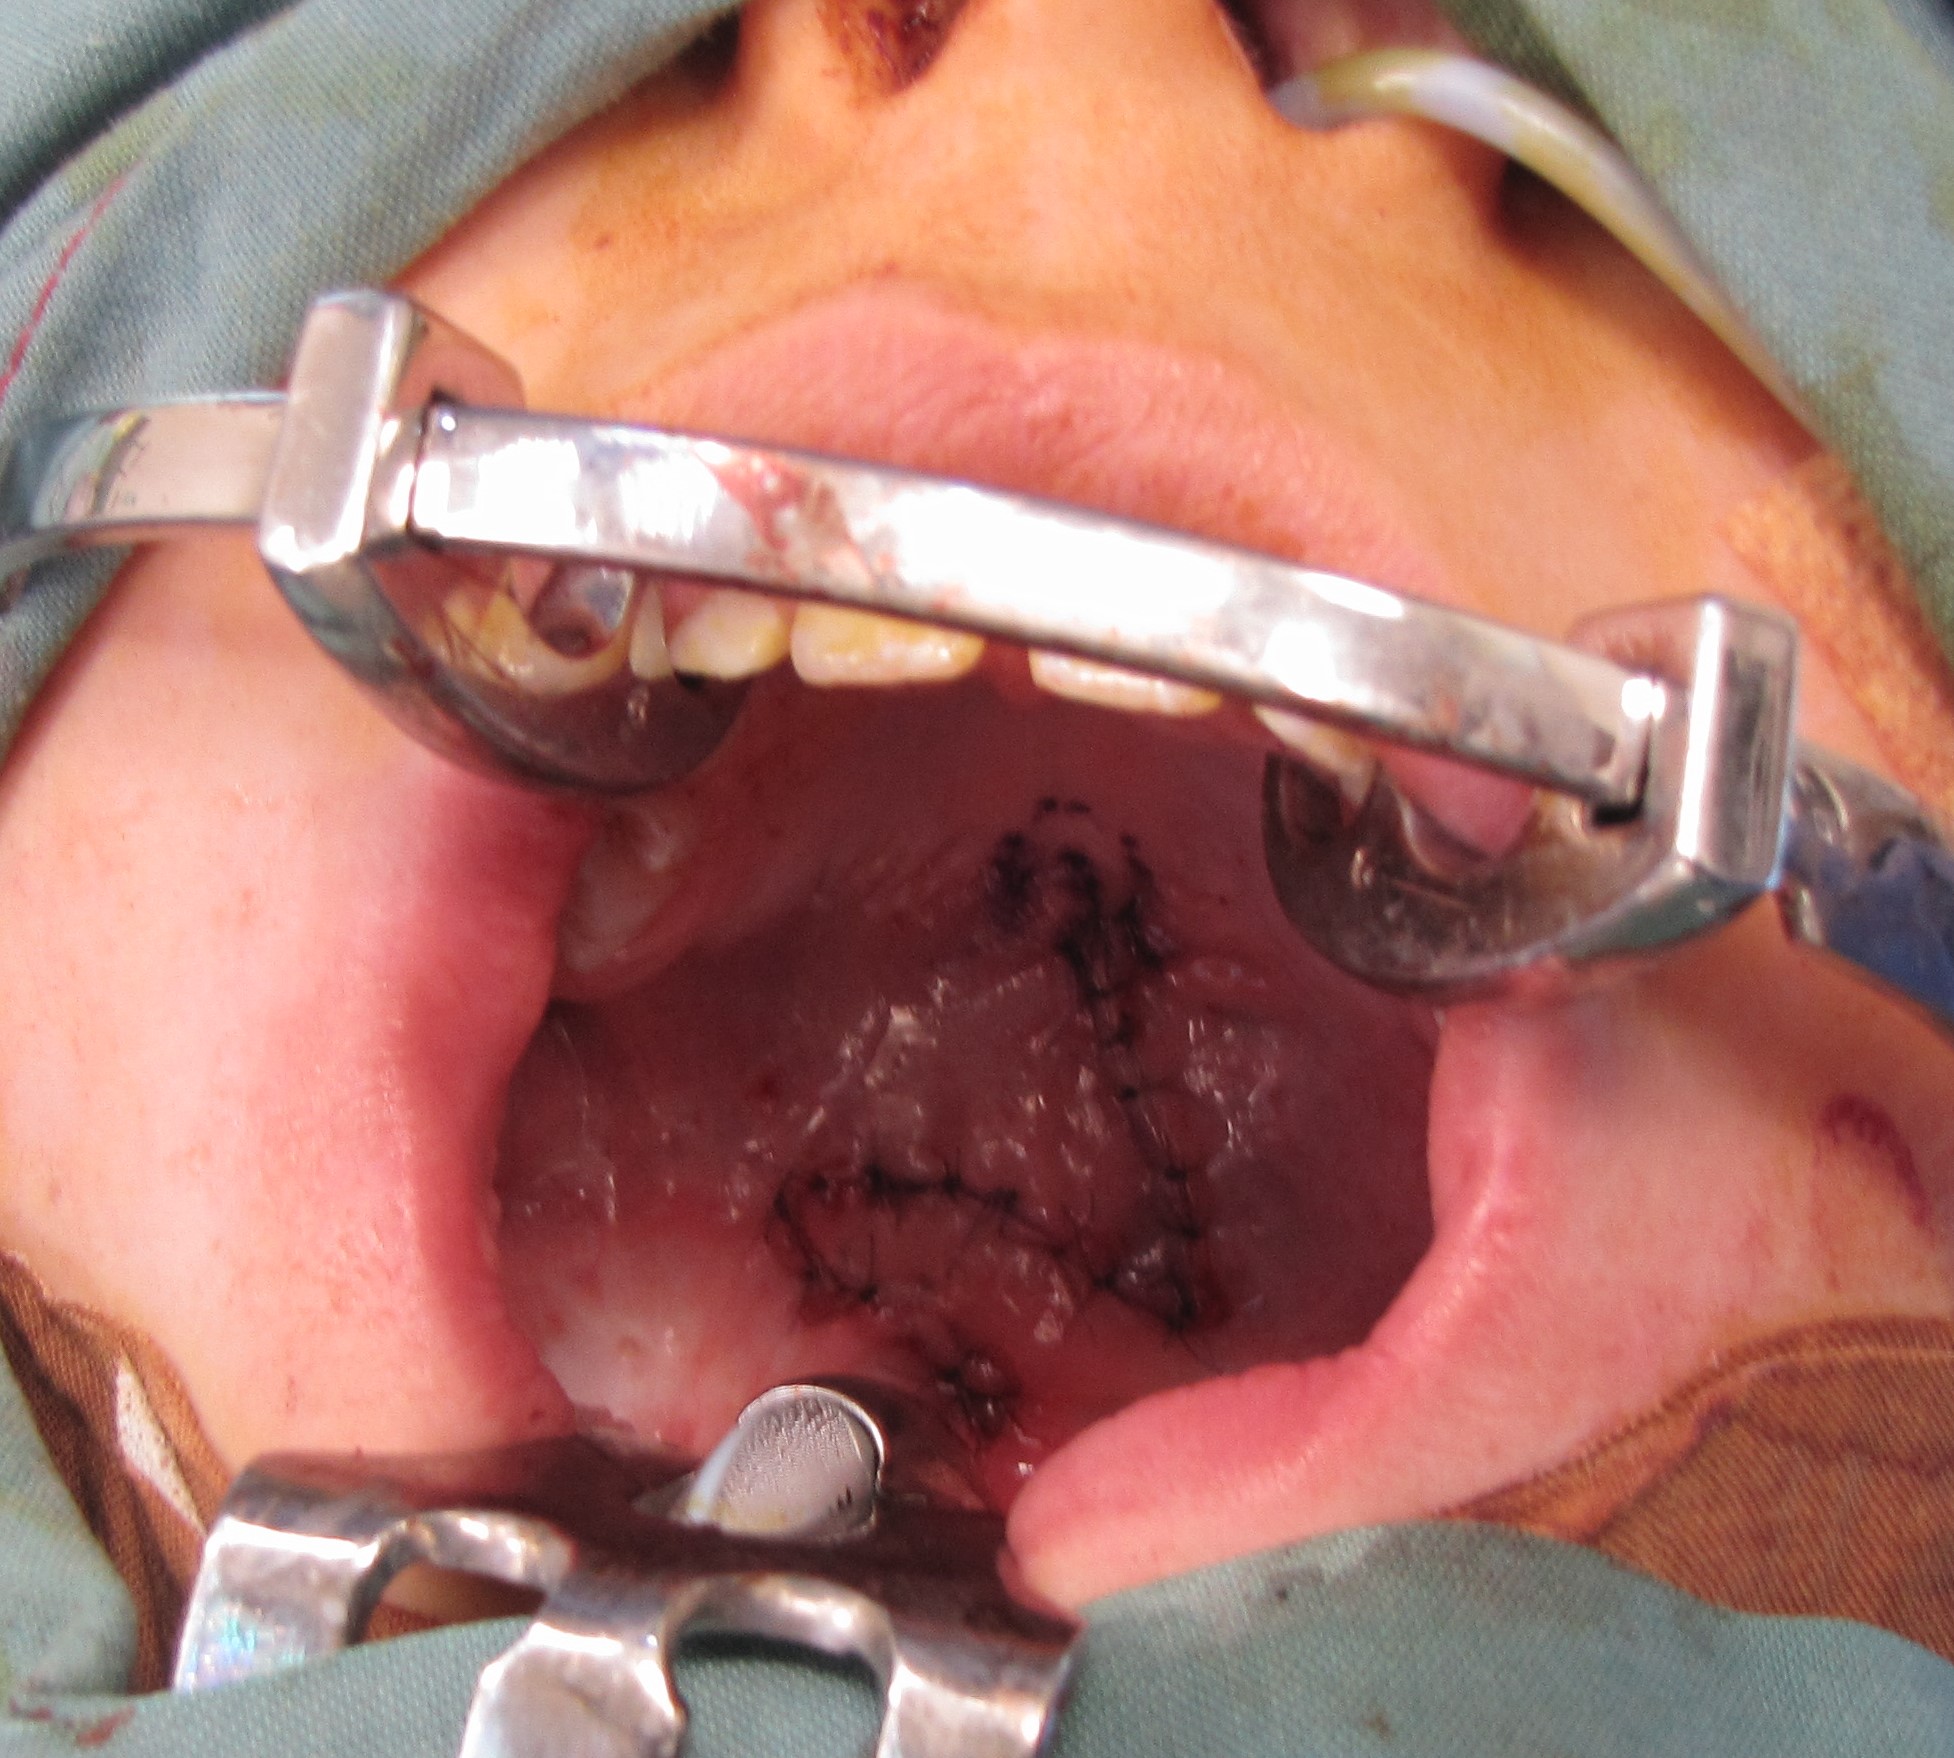 Operative view of a secondary cleft palate involving the soft palate, after repair following Furlow double opposing Z-plasty.